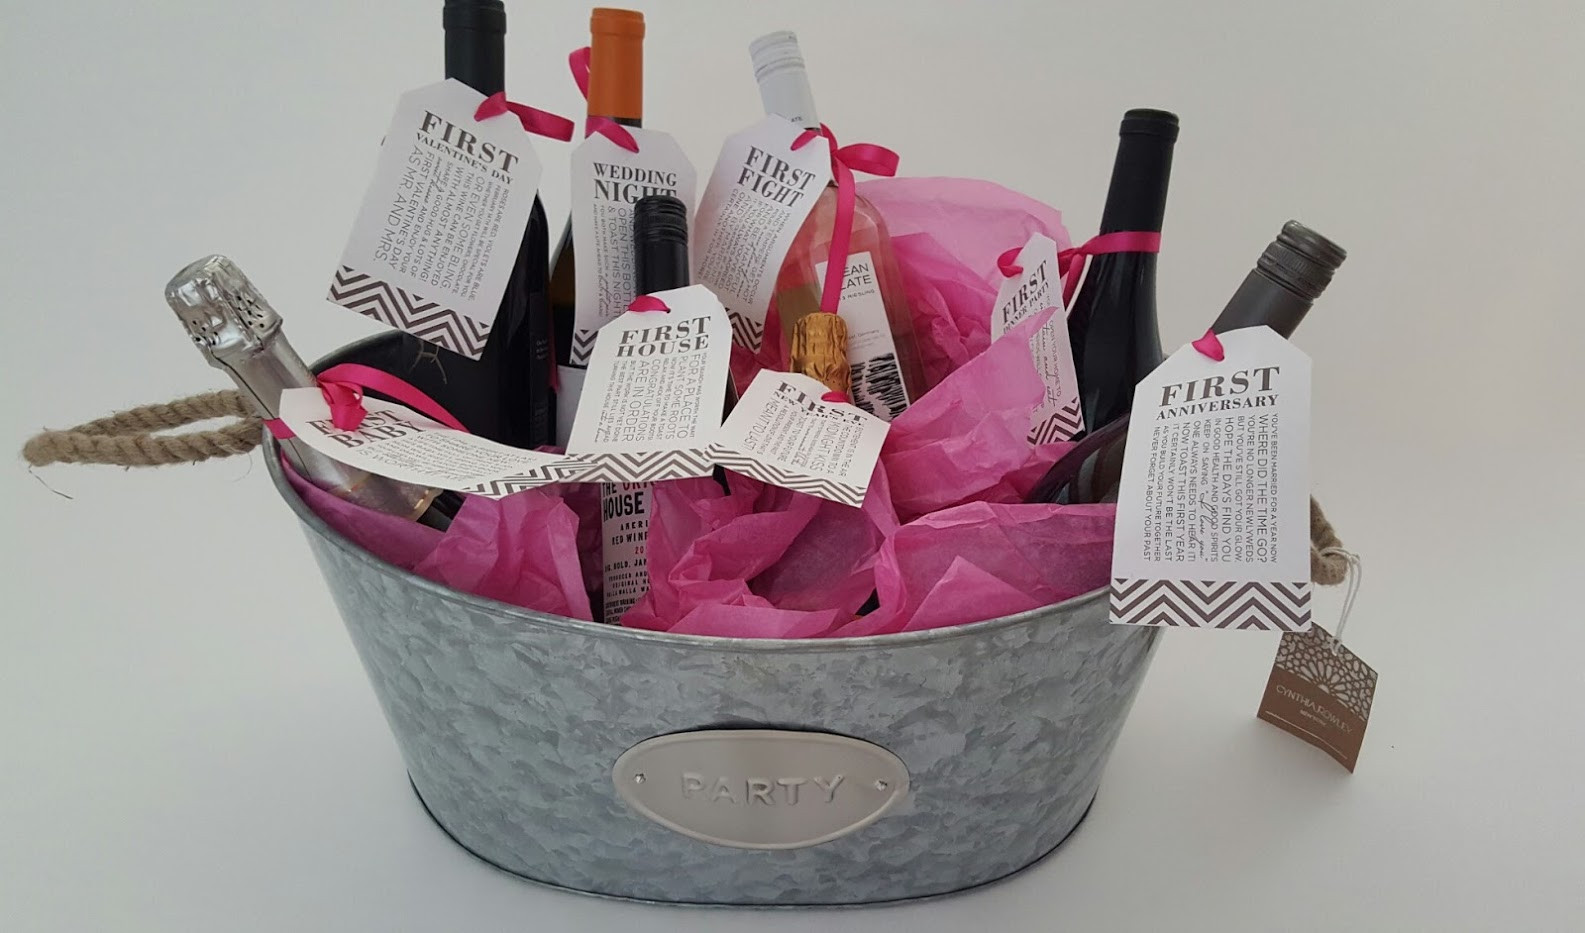 Bridal Gift Basket Ideas
 Bridal Shower Gift DIY to Try A Basket of “Firsts” for